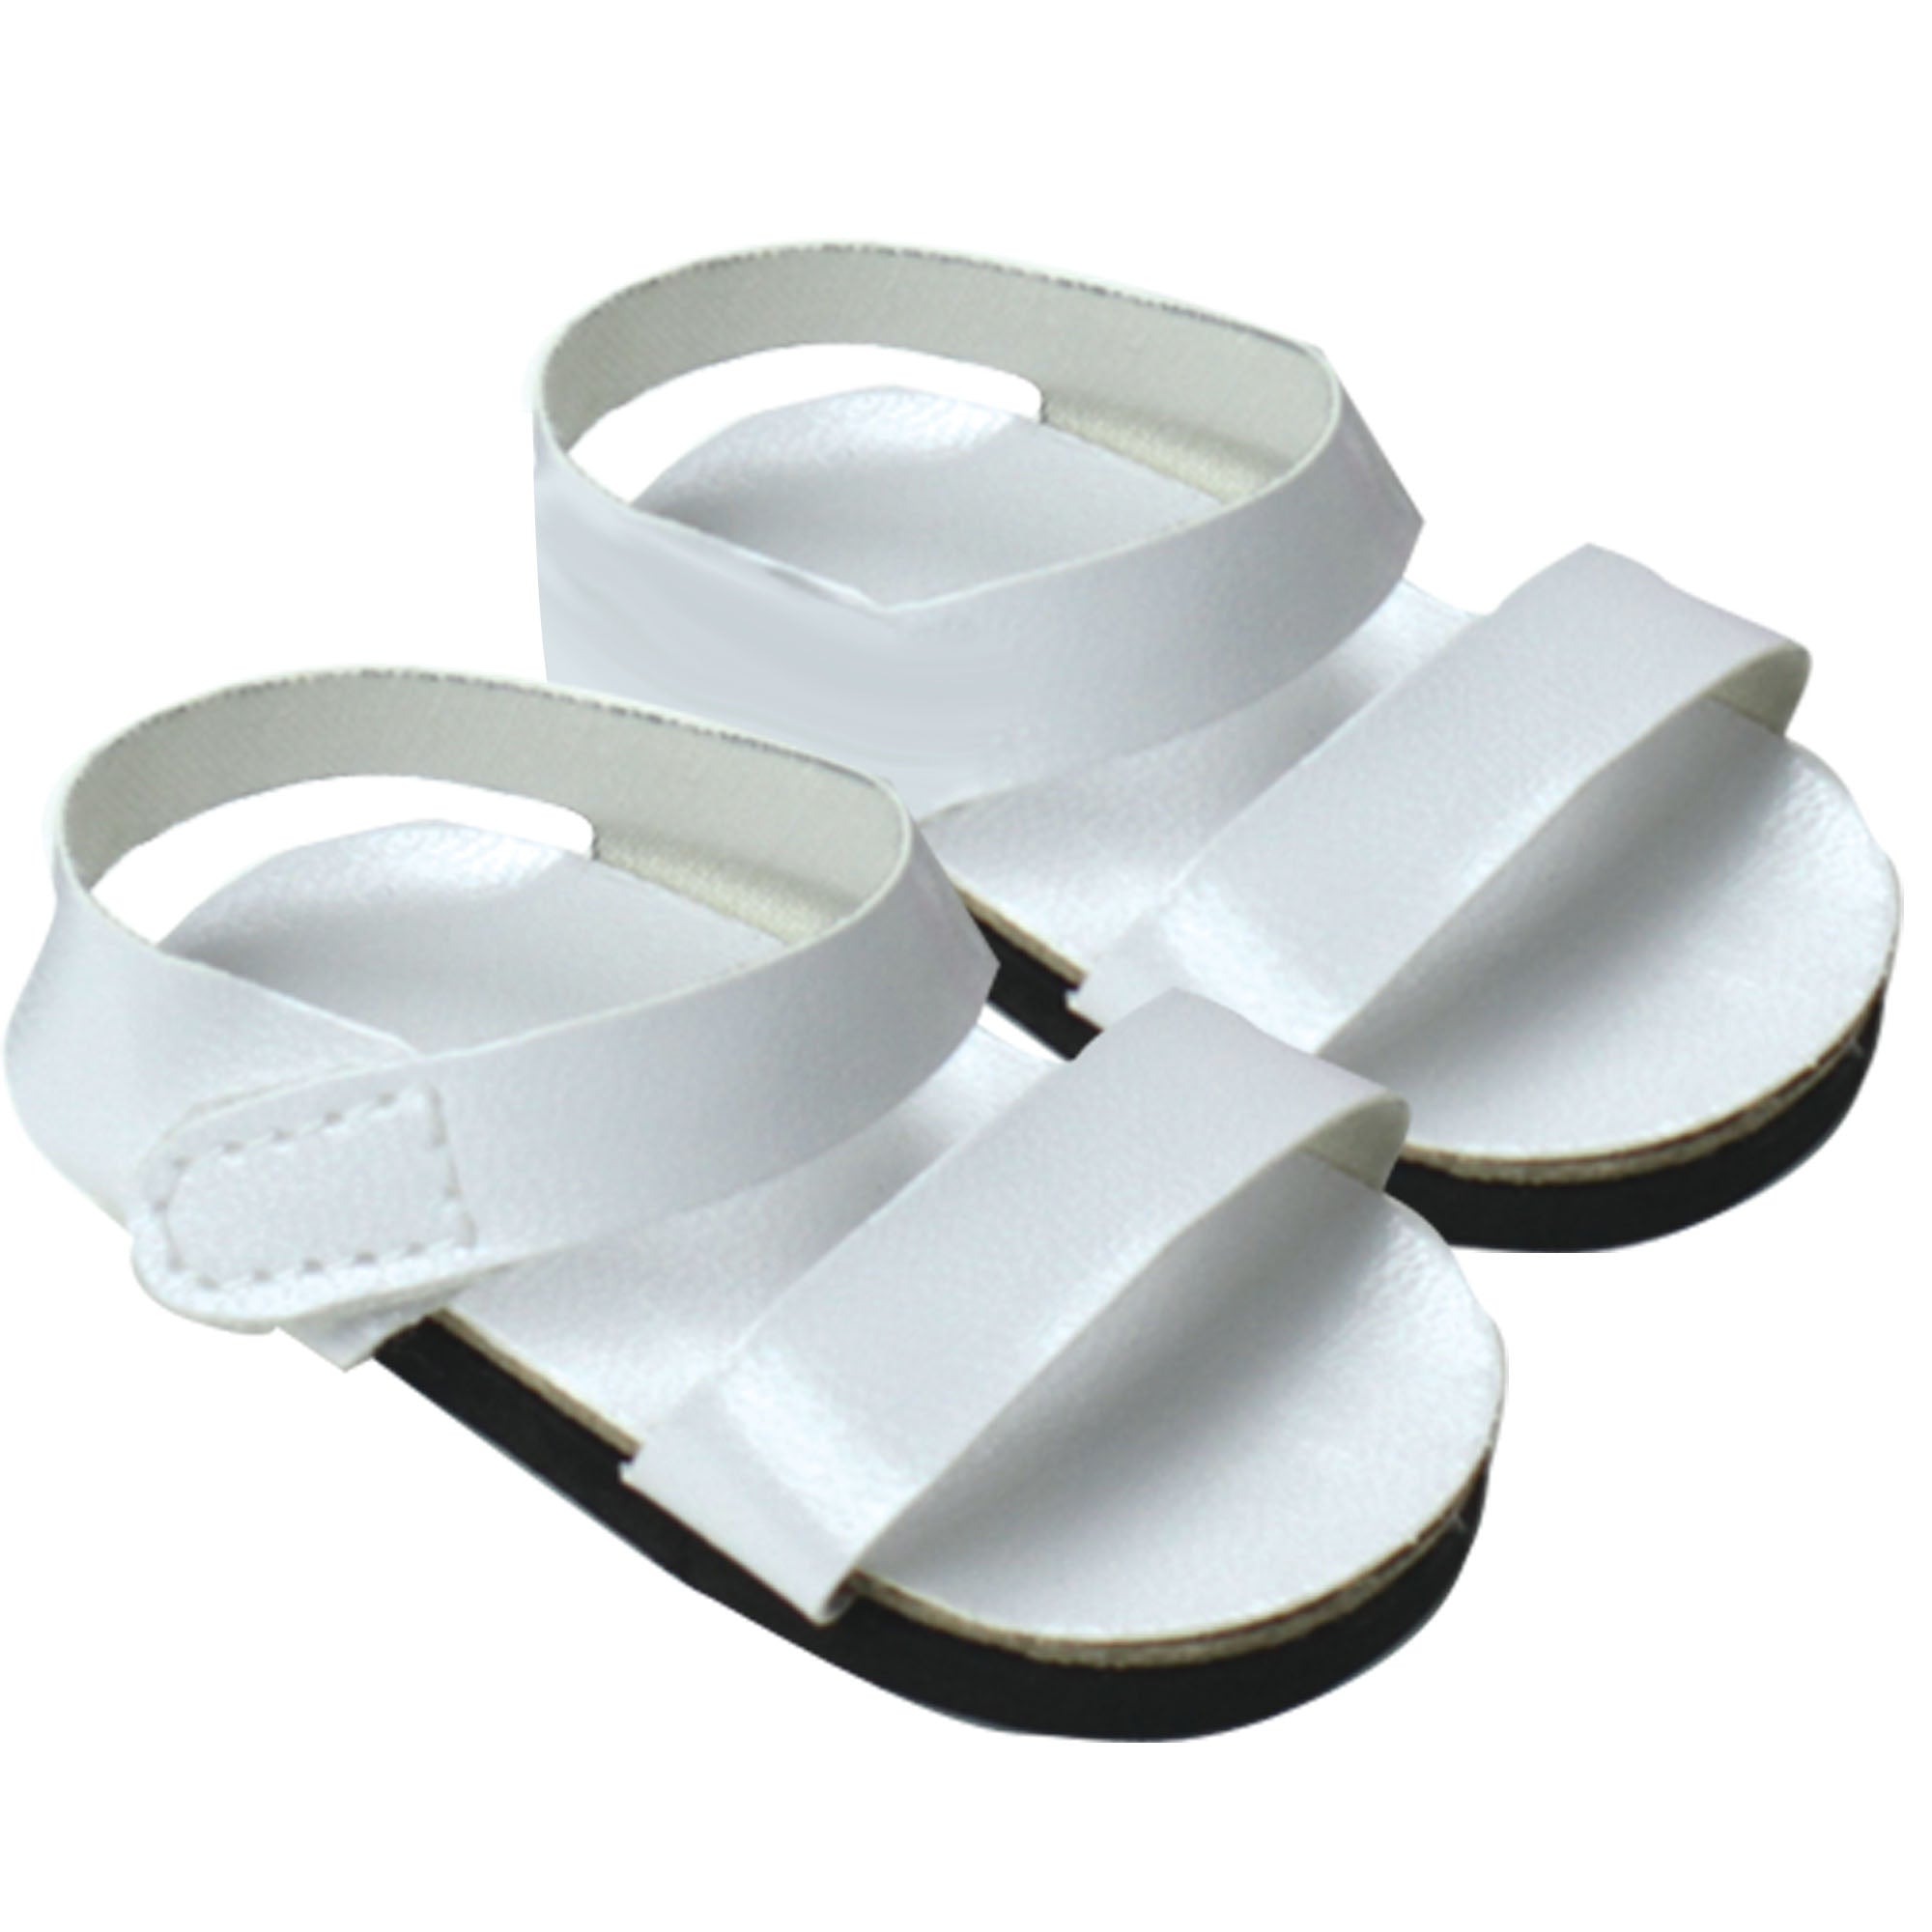 Sophia's Faux Leather Strap Sandals for 18" Dolls, White